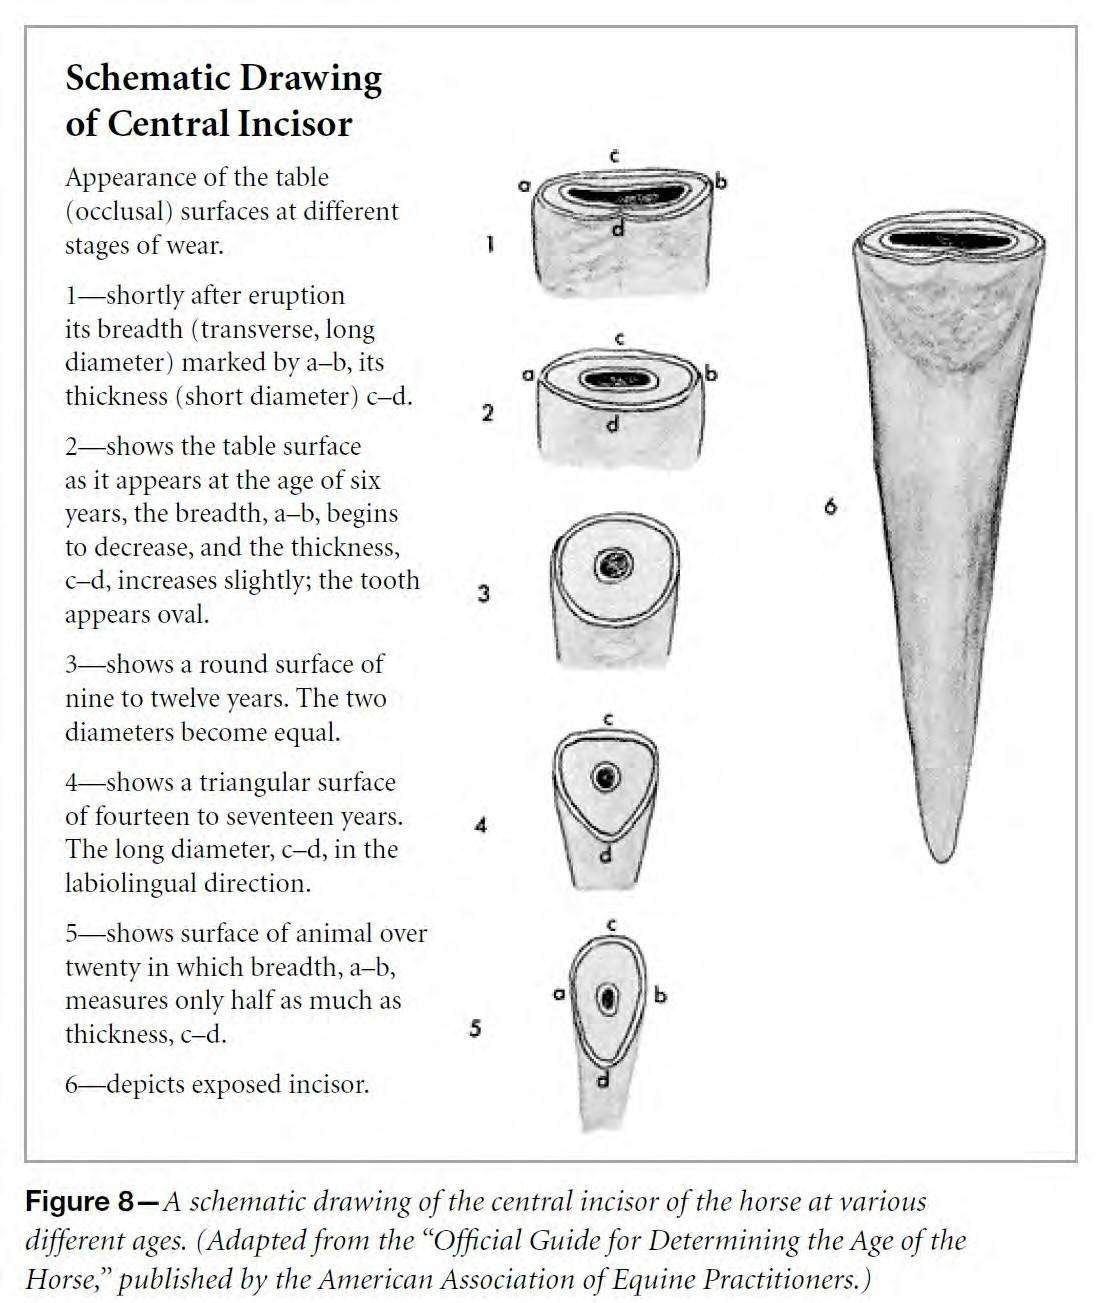 Schematic Drawing of Central Incisor - Horse